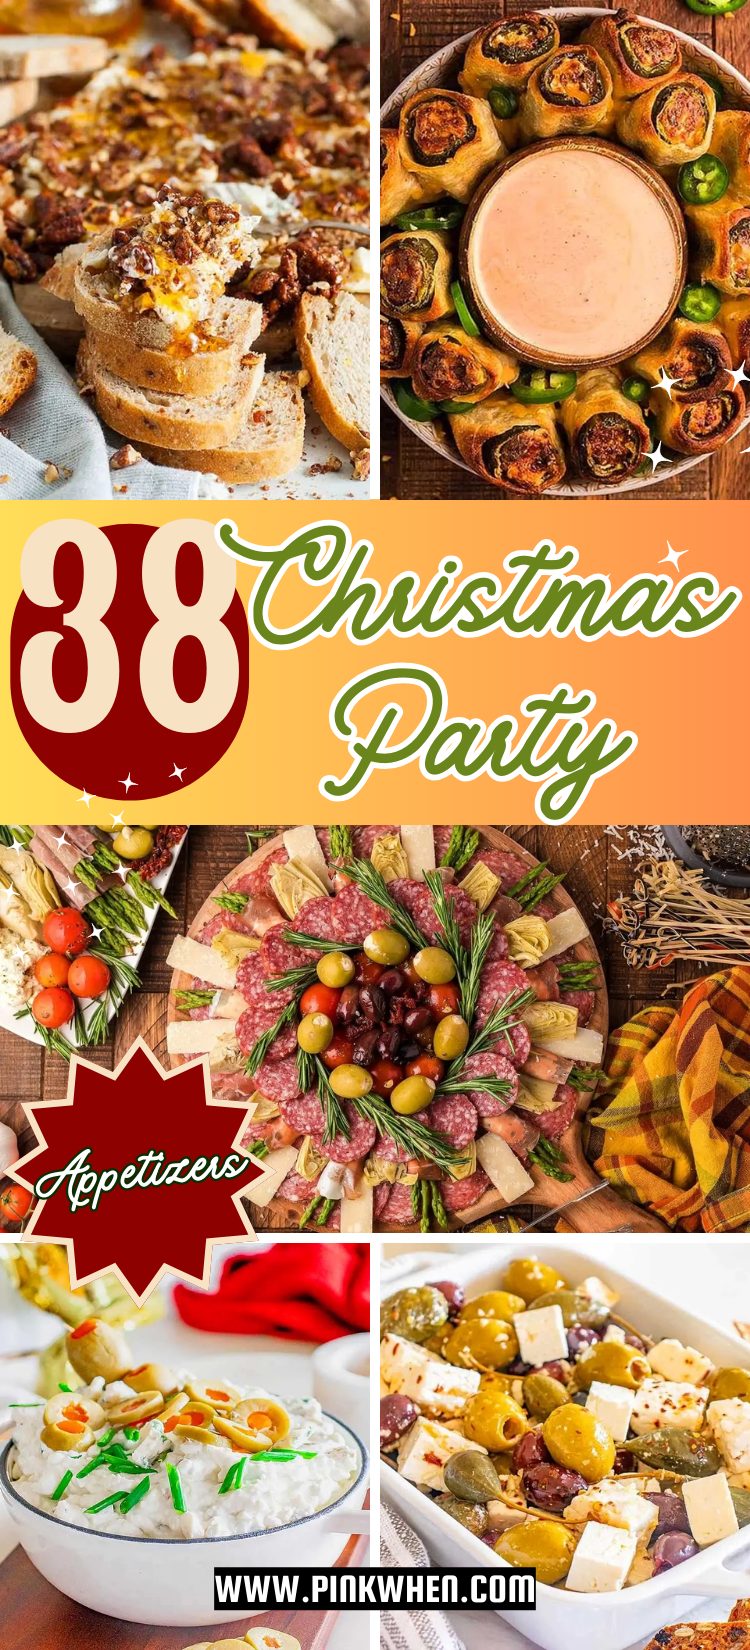 38 Christmas Party Appetizers Perfect for a Crowd